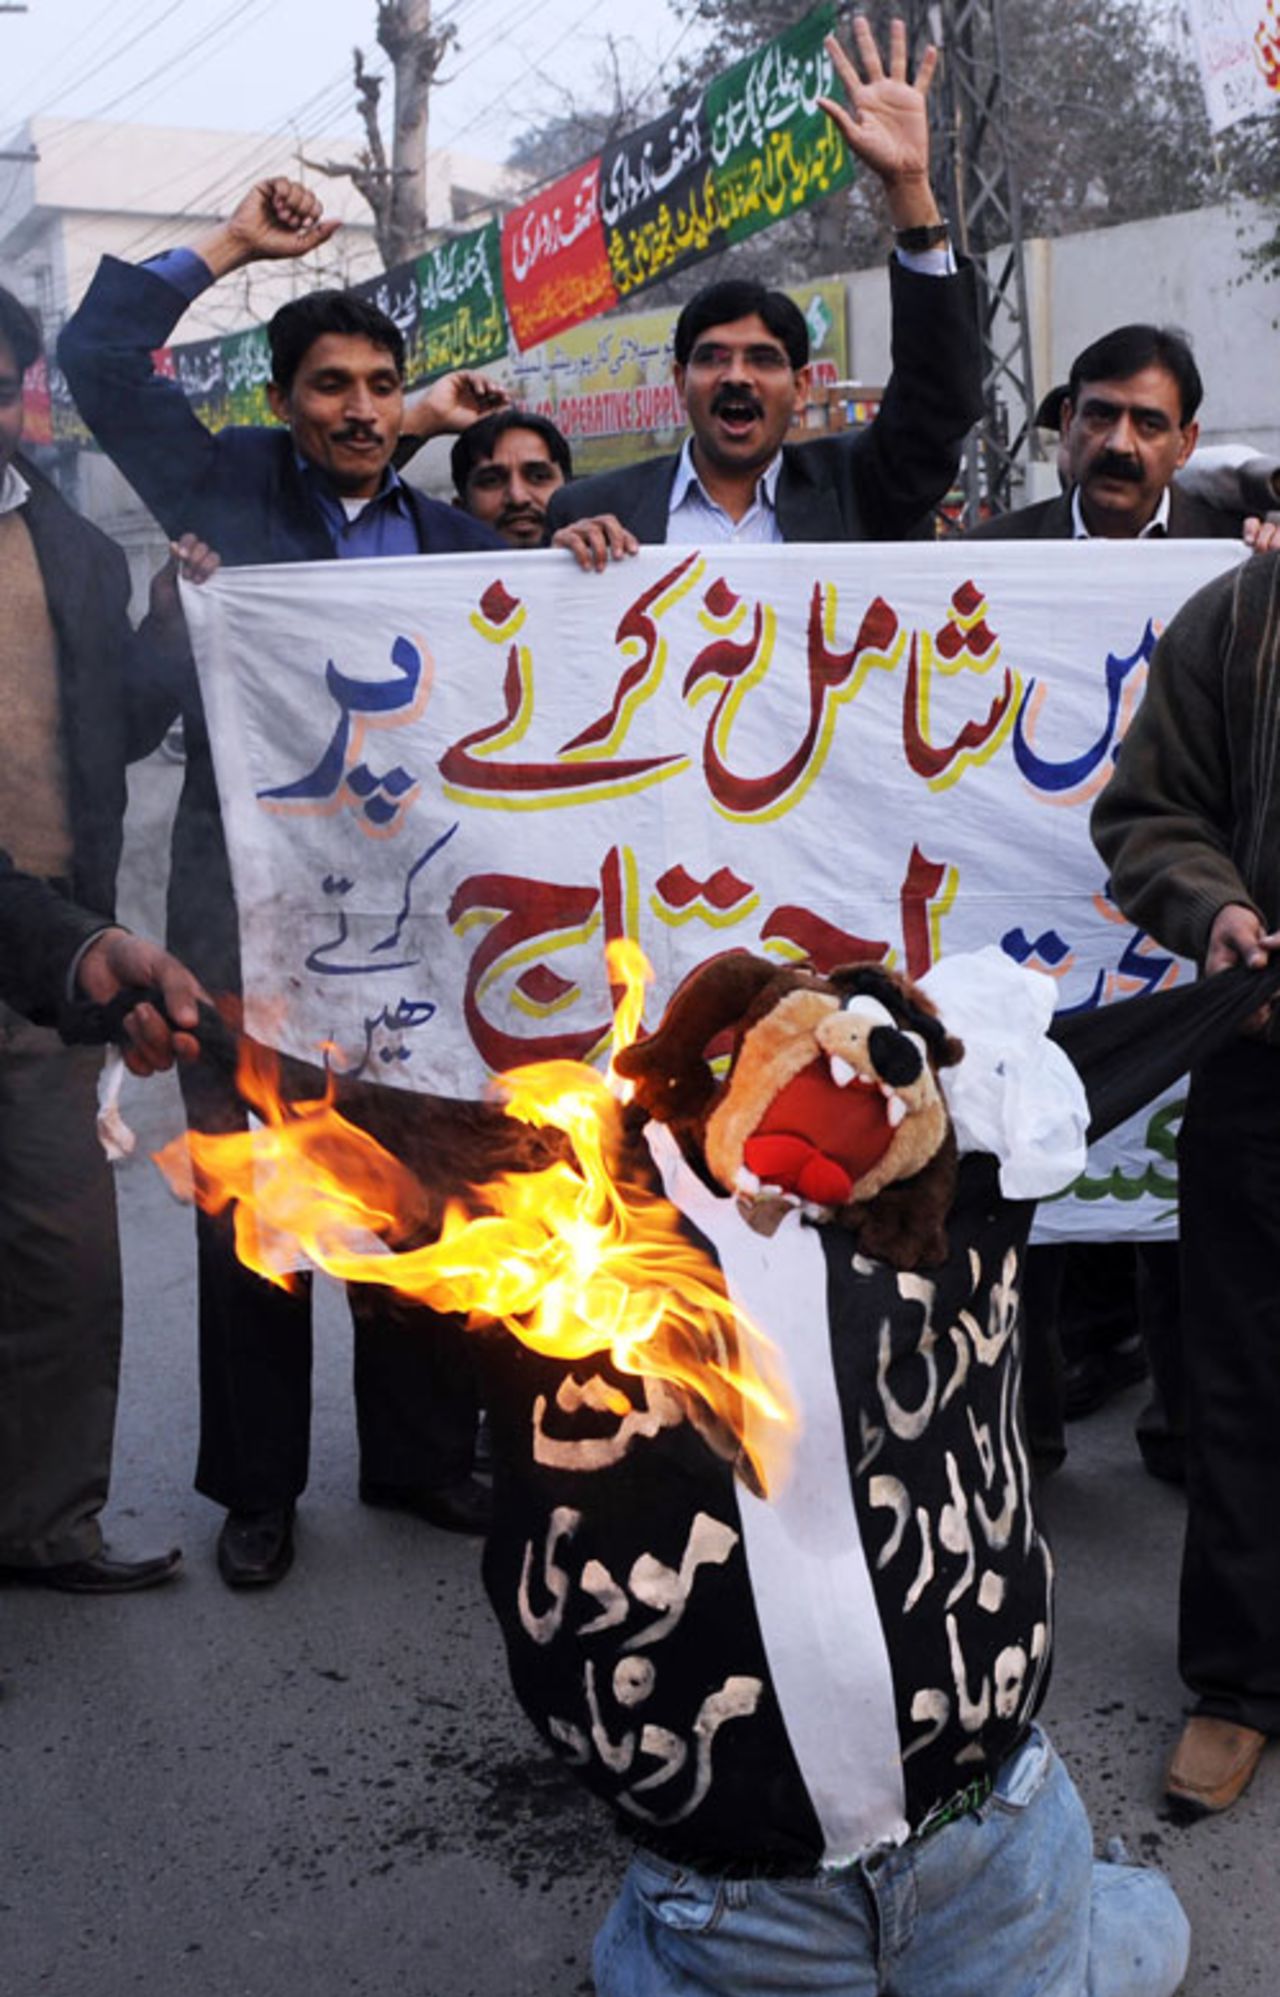 Angry Pakistan cricket fans burn an effigy of Lalit Modi in reaction to the exclusion of Pakistan's cricketers from the third season of the IPL, 20 January, 2010